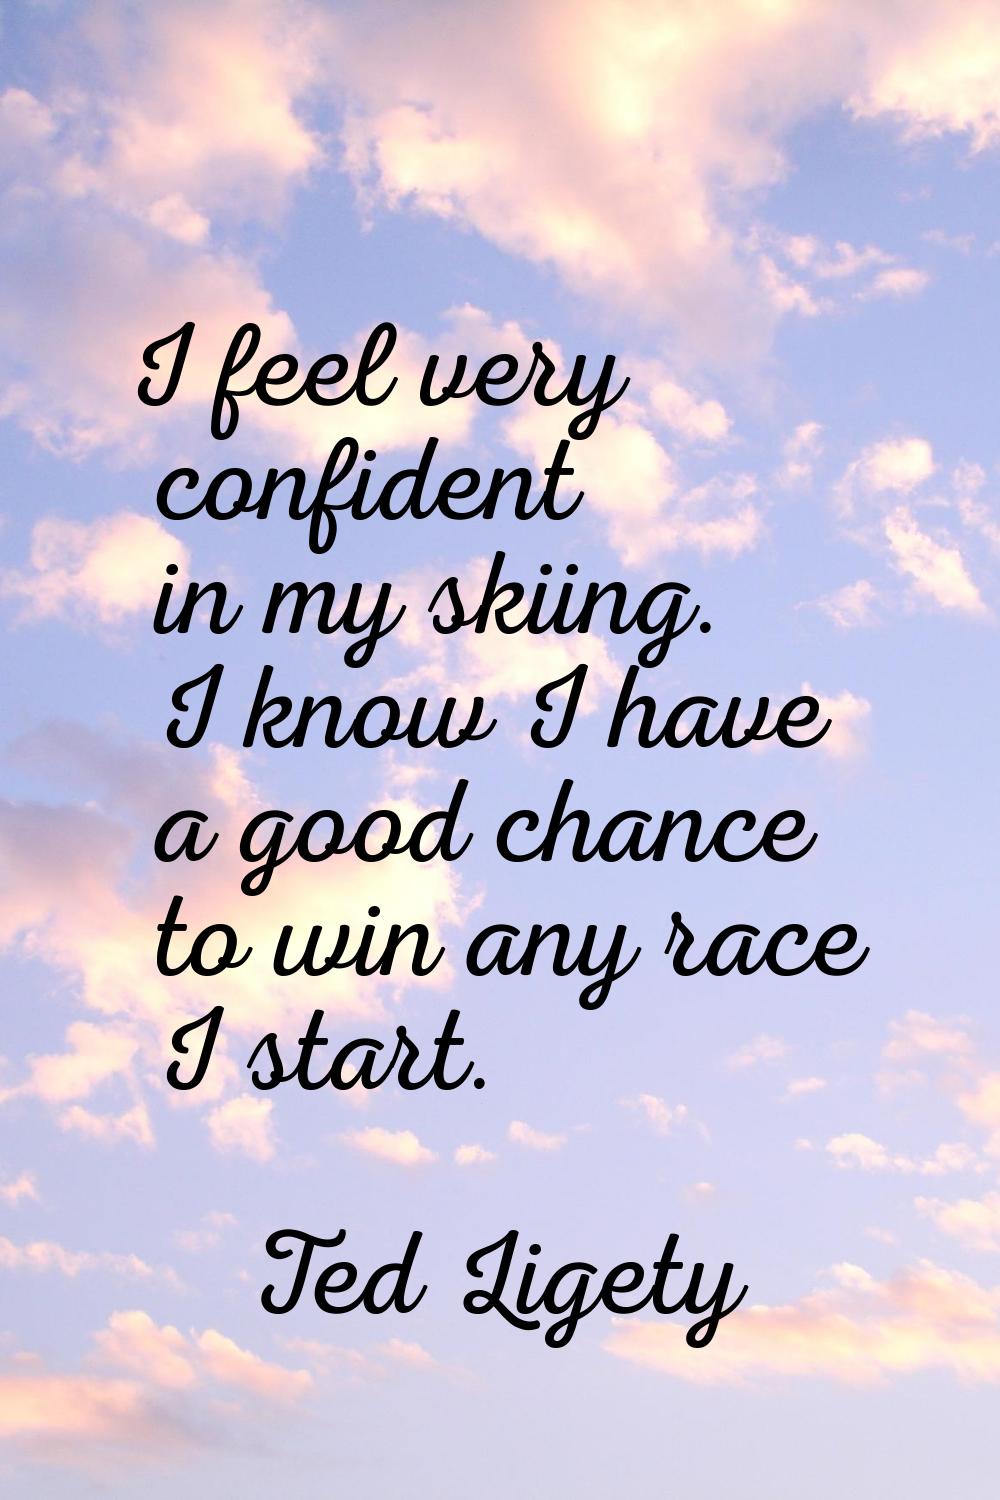 I feel very confident in my skiing. I know I have a good chance to win any race I start.